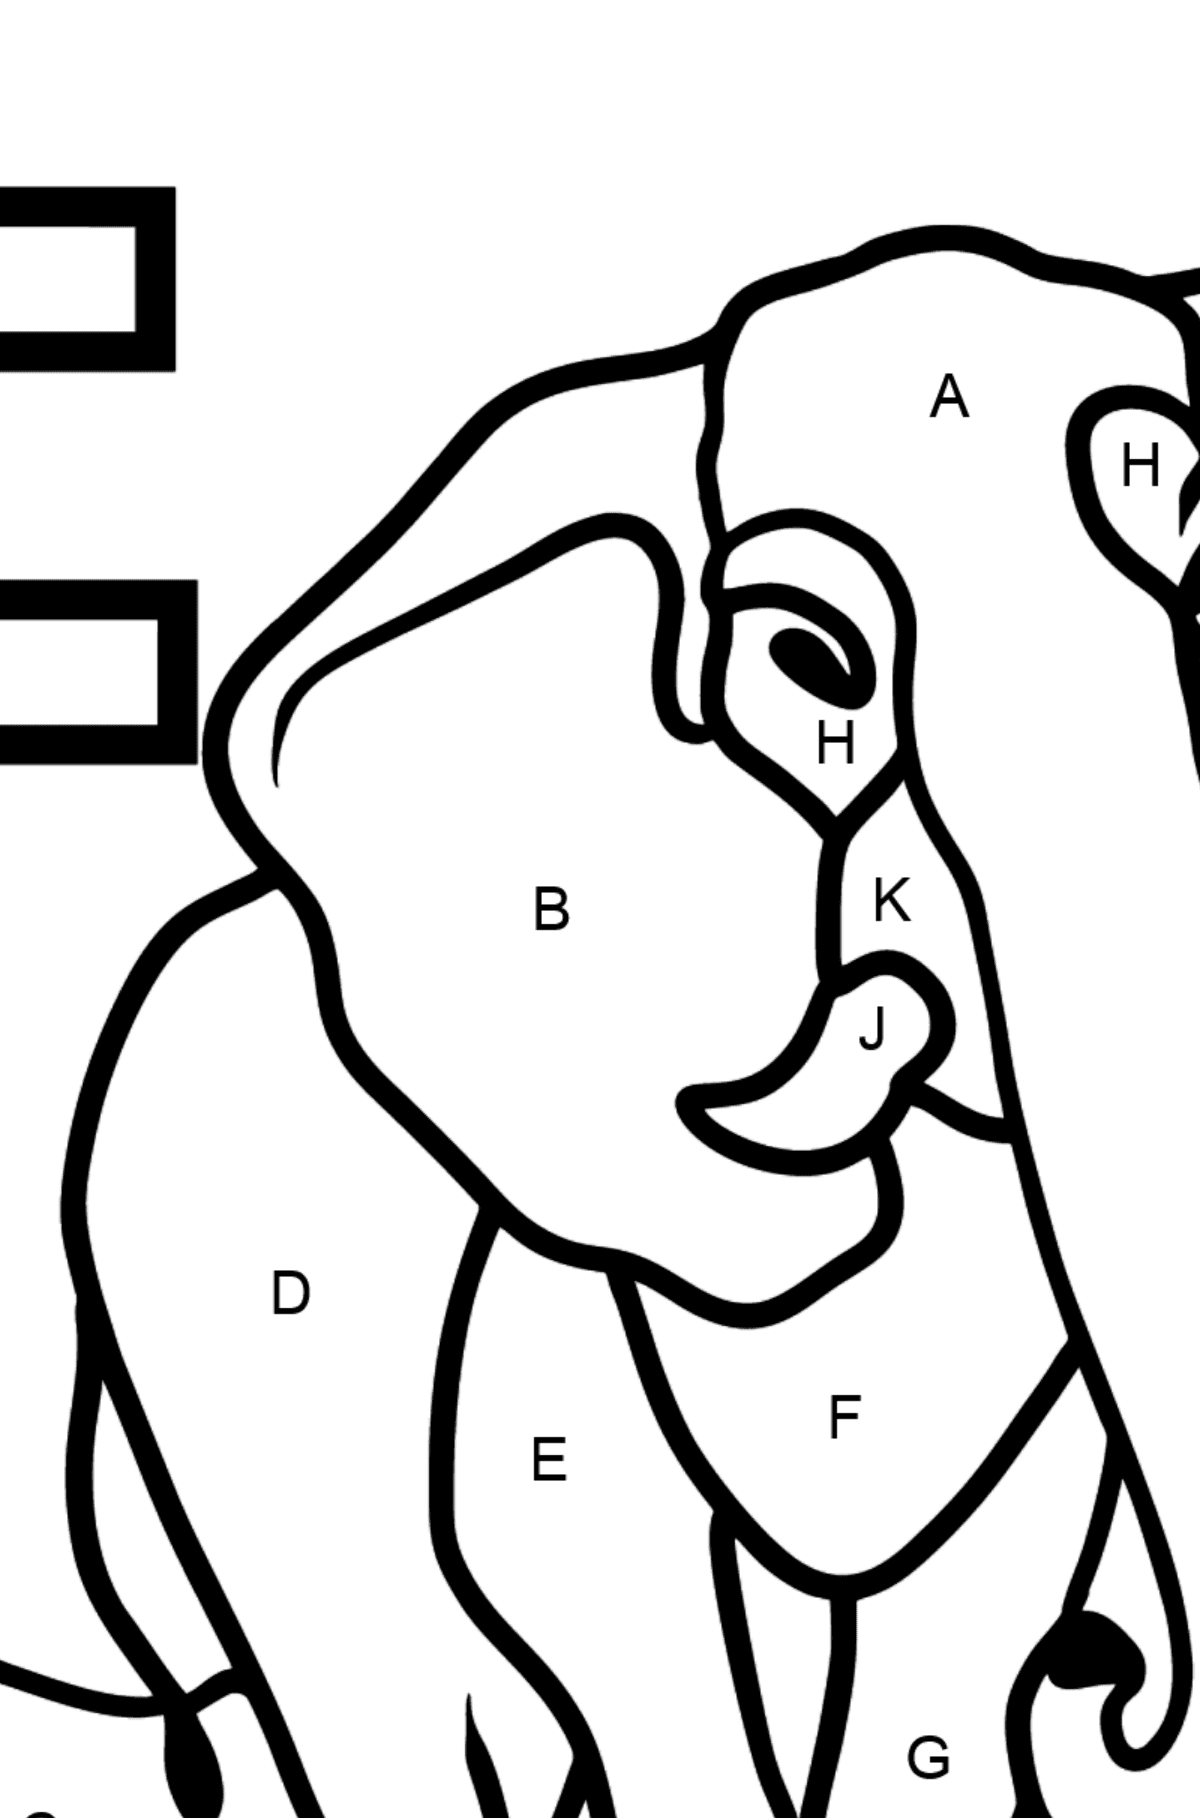 Spanish Letter E coloring pages - ELEFANTE - Coloring by Letters for Kids